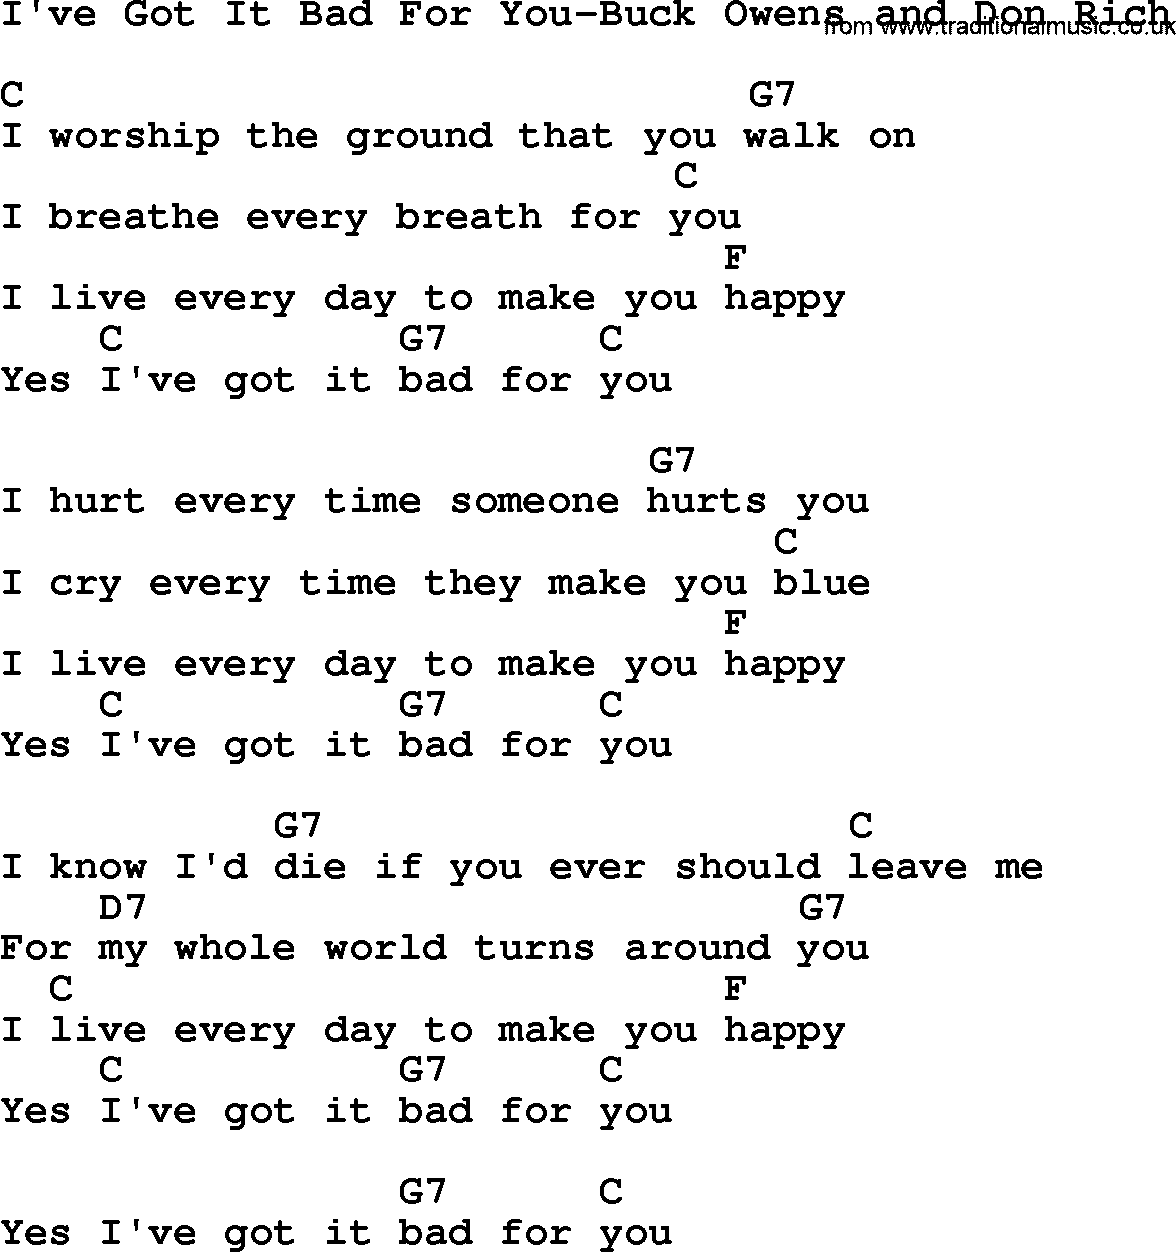 Country music song: I've Got It Bad For You-Buck Owens And Don Rich lyrics and chords